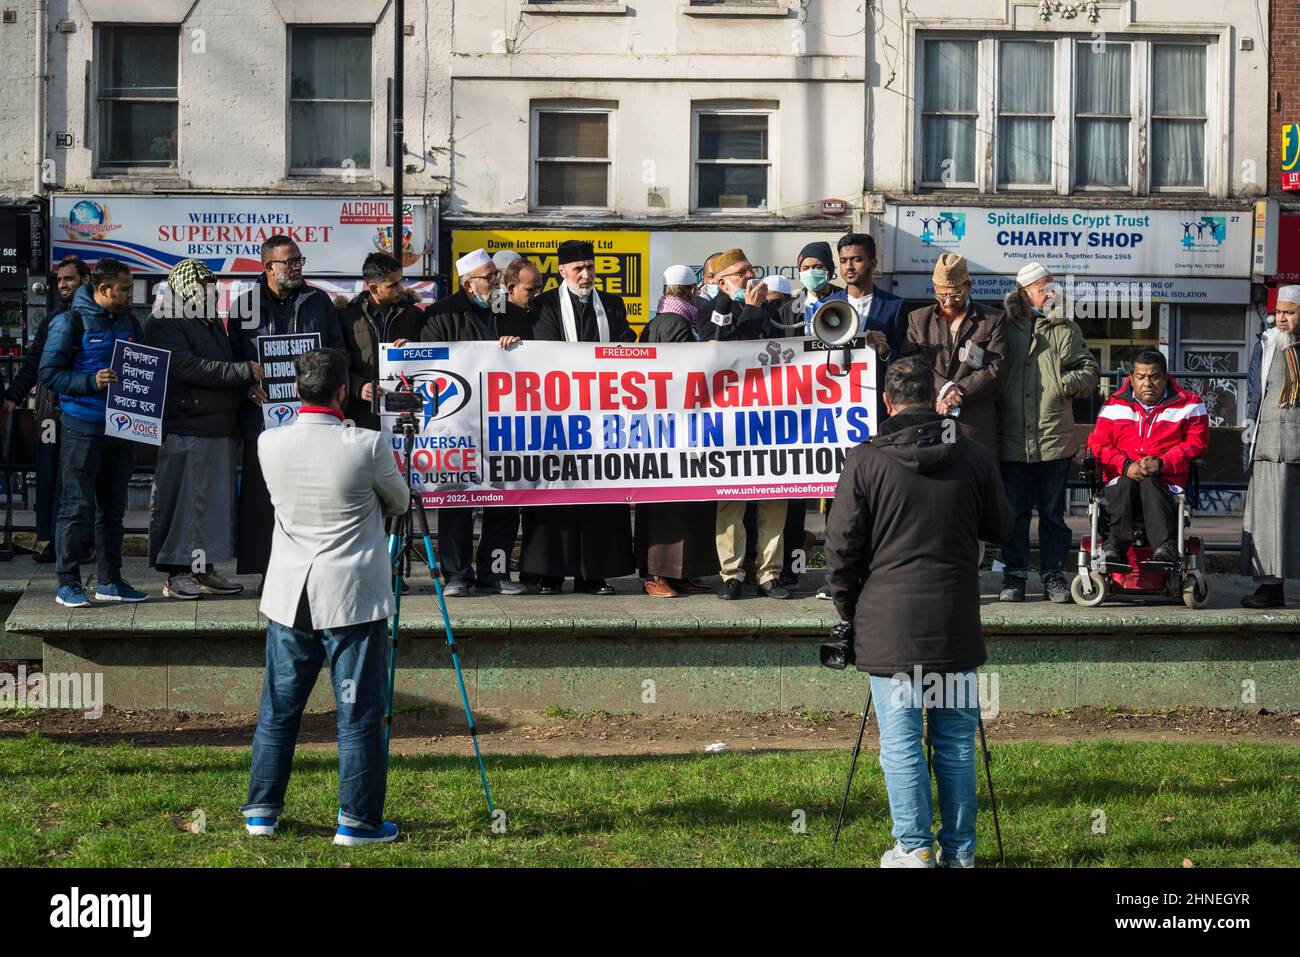 Protest against hijab ban in schools in India, Altab Ali Park, formerly known as St Mary's Park, Whitechapel Road, Tower Hamlets, London, UK Stock Photo